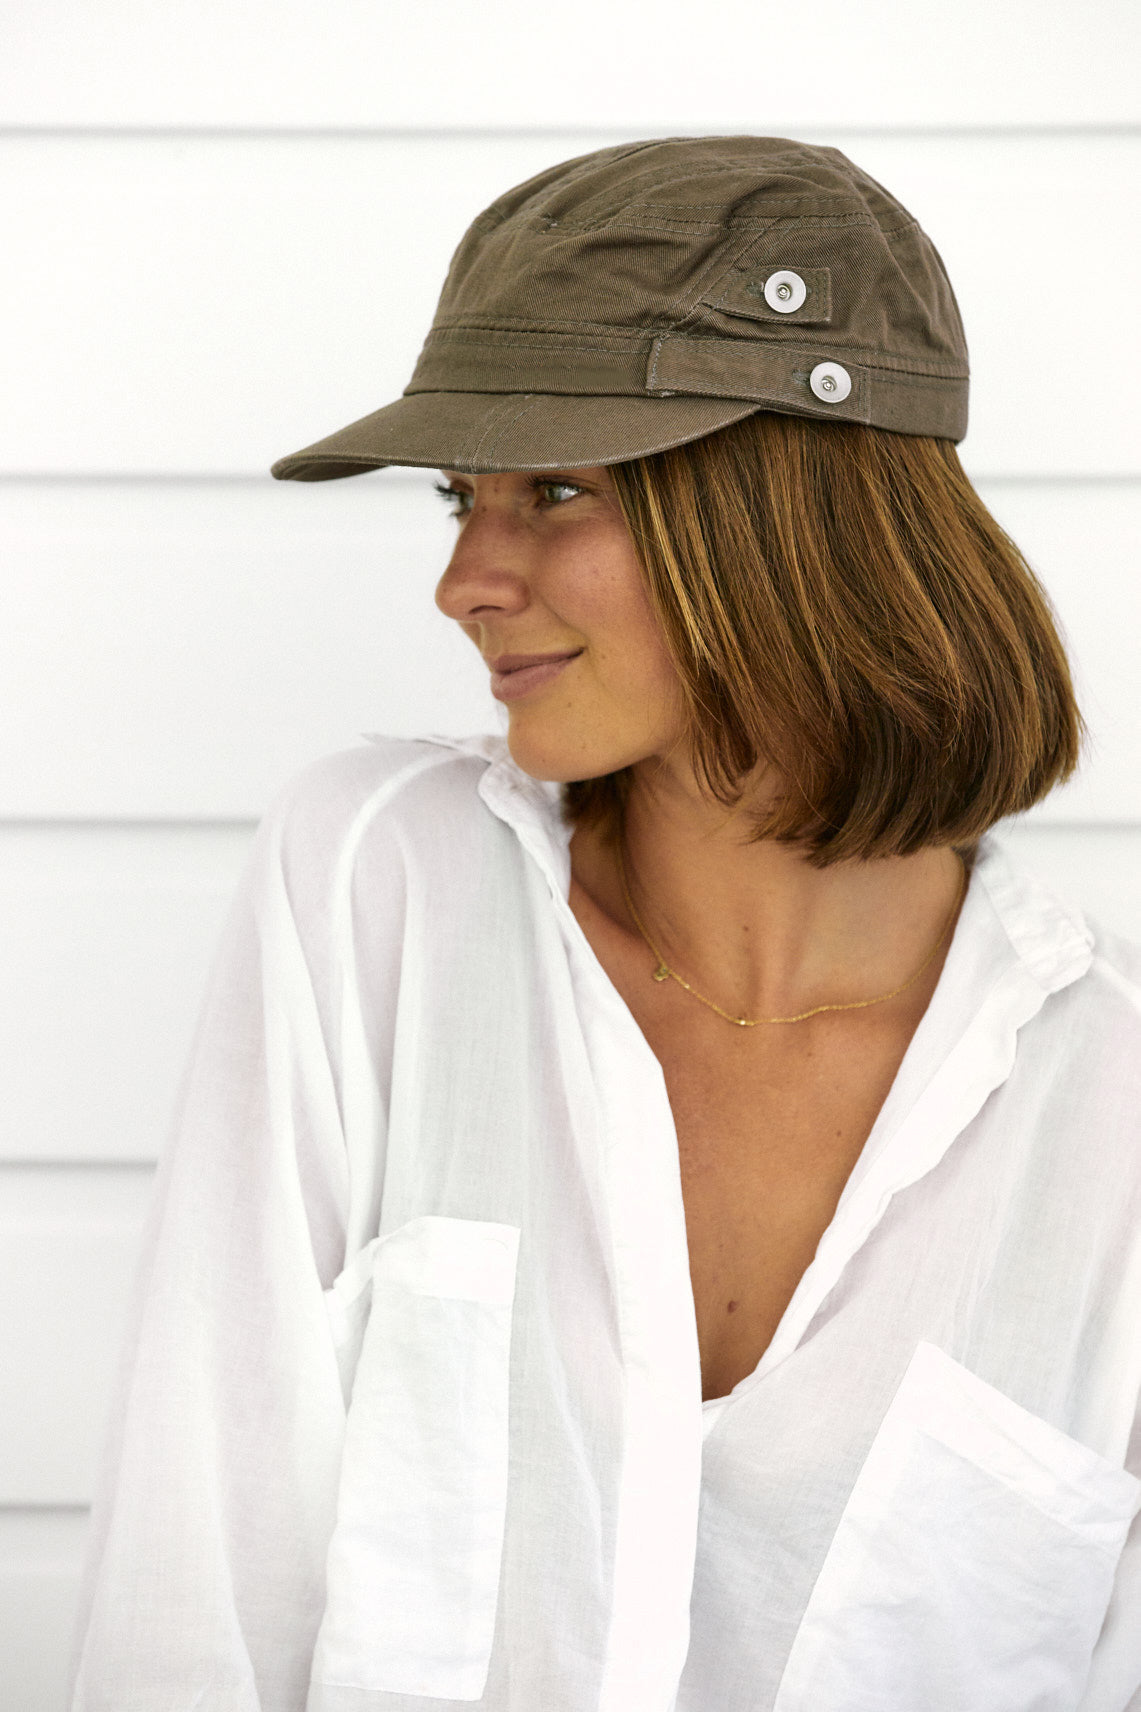 Woman profile in Olive organic cotton field army fatigue cap with silver buttons on side